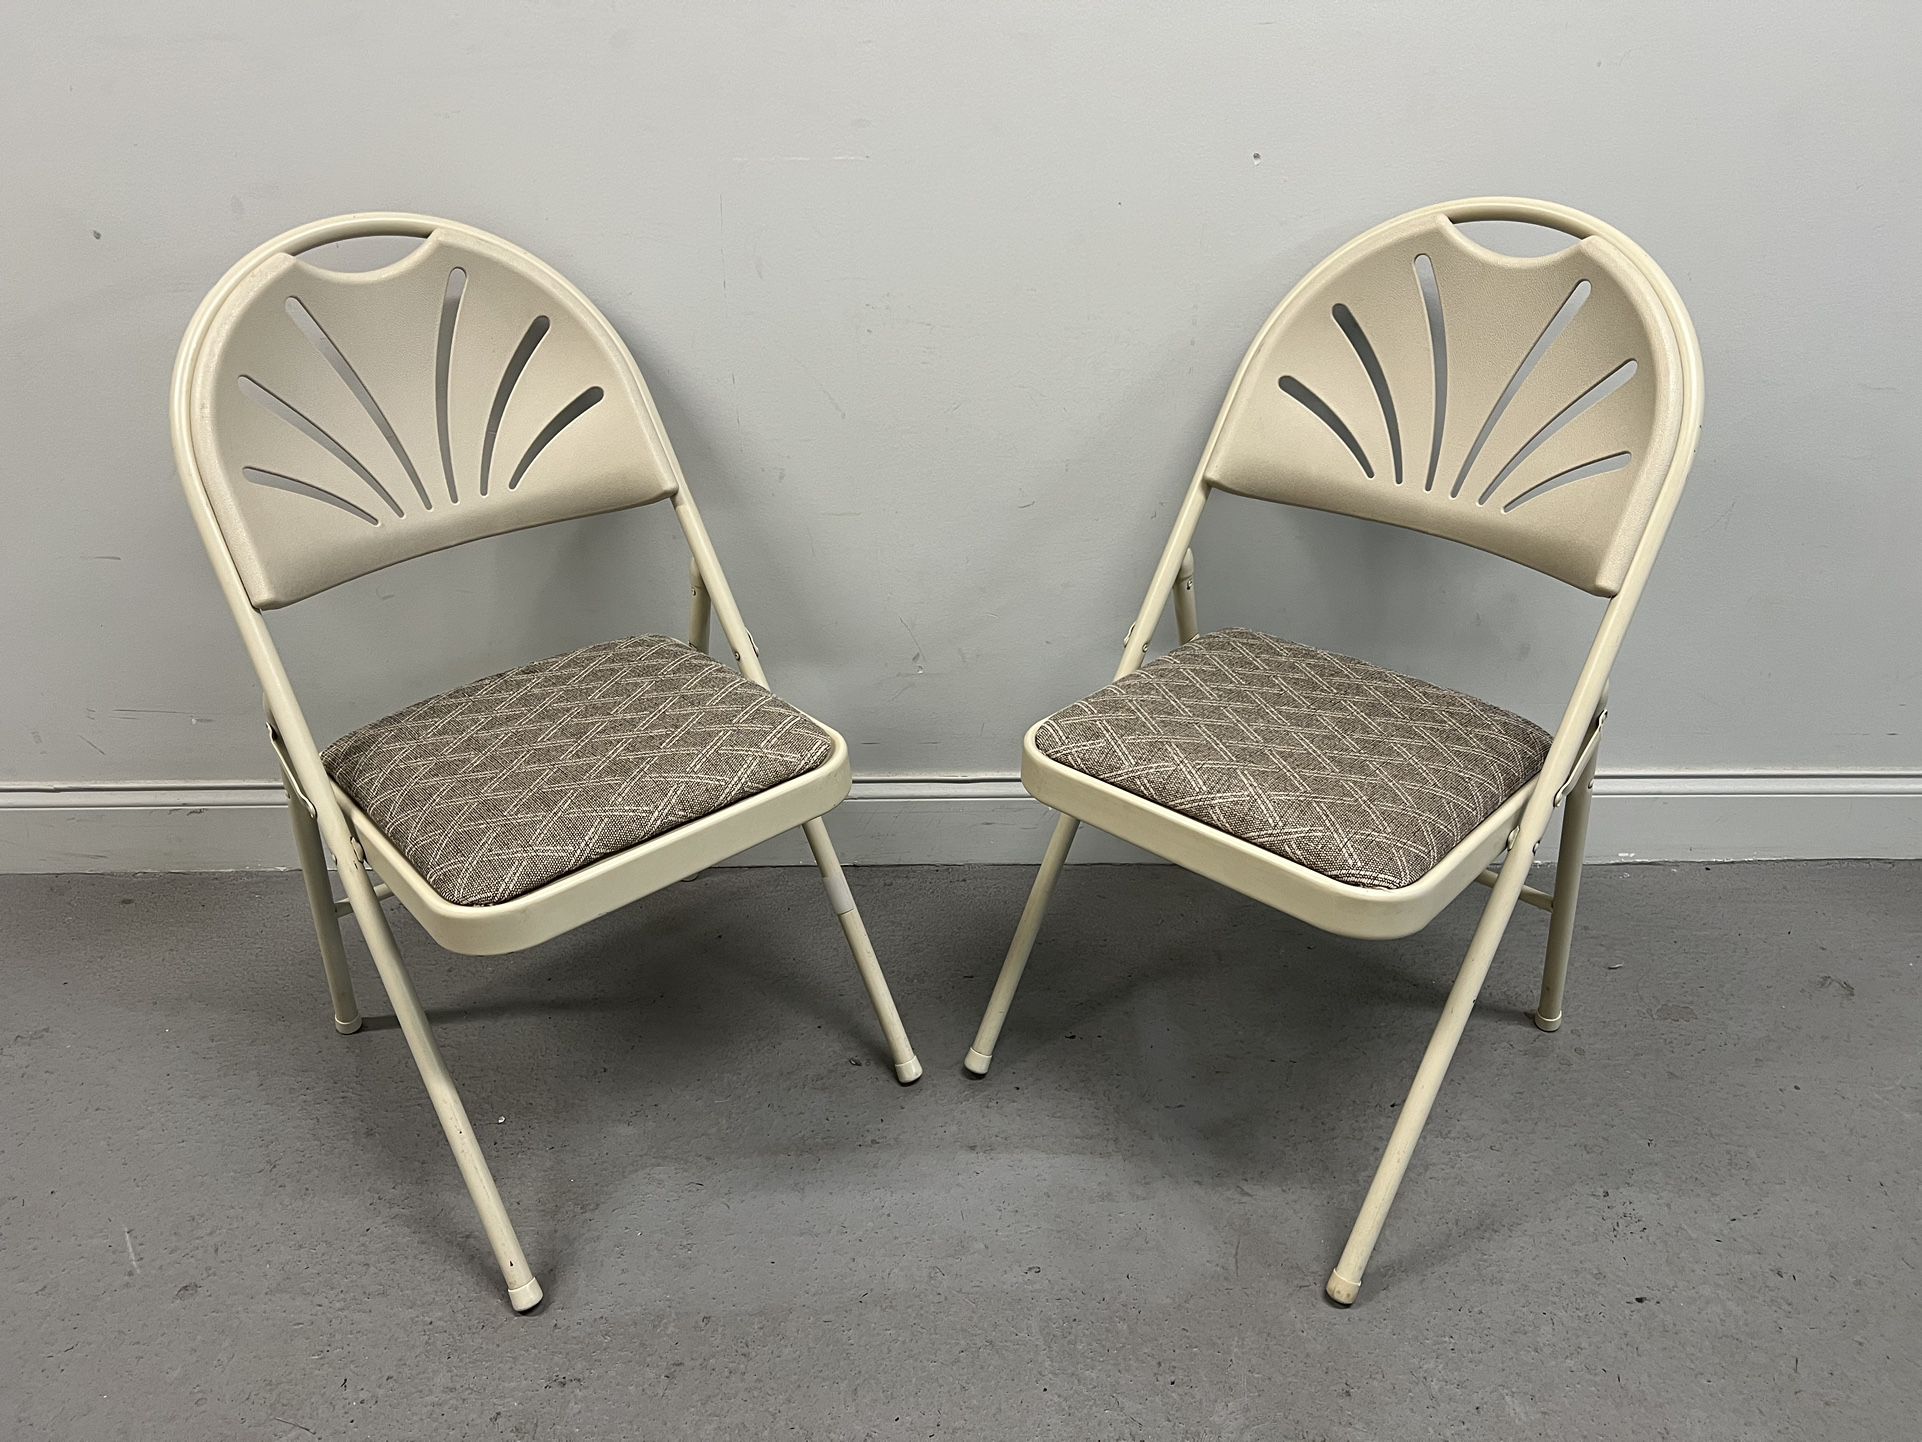 SAMSONITE VINTAGE Padded Folding Chairs (Good condition) Two (02) Chairs for $70